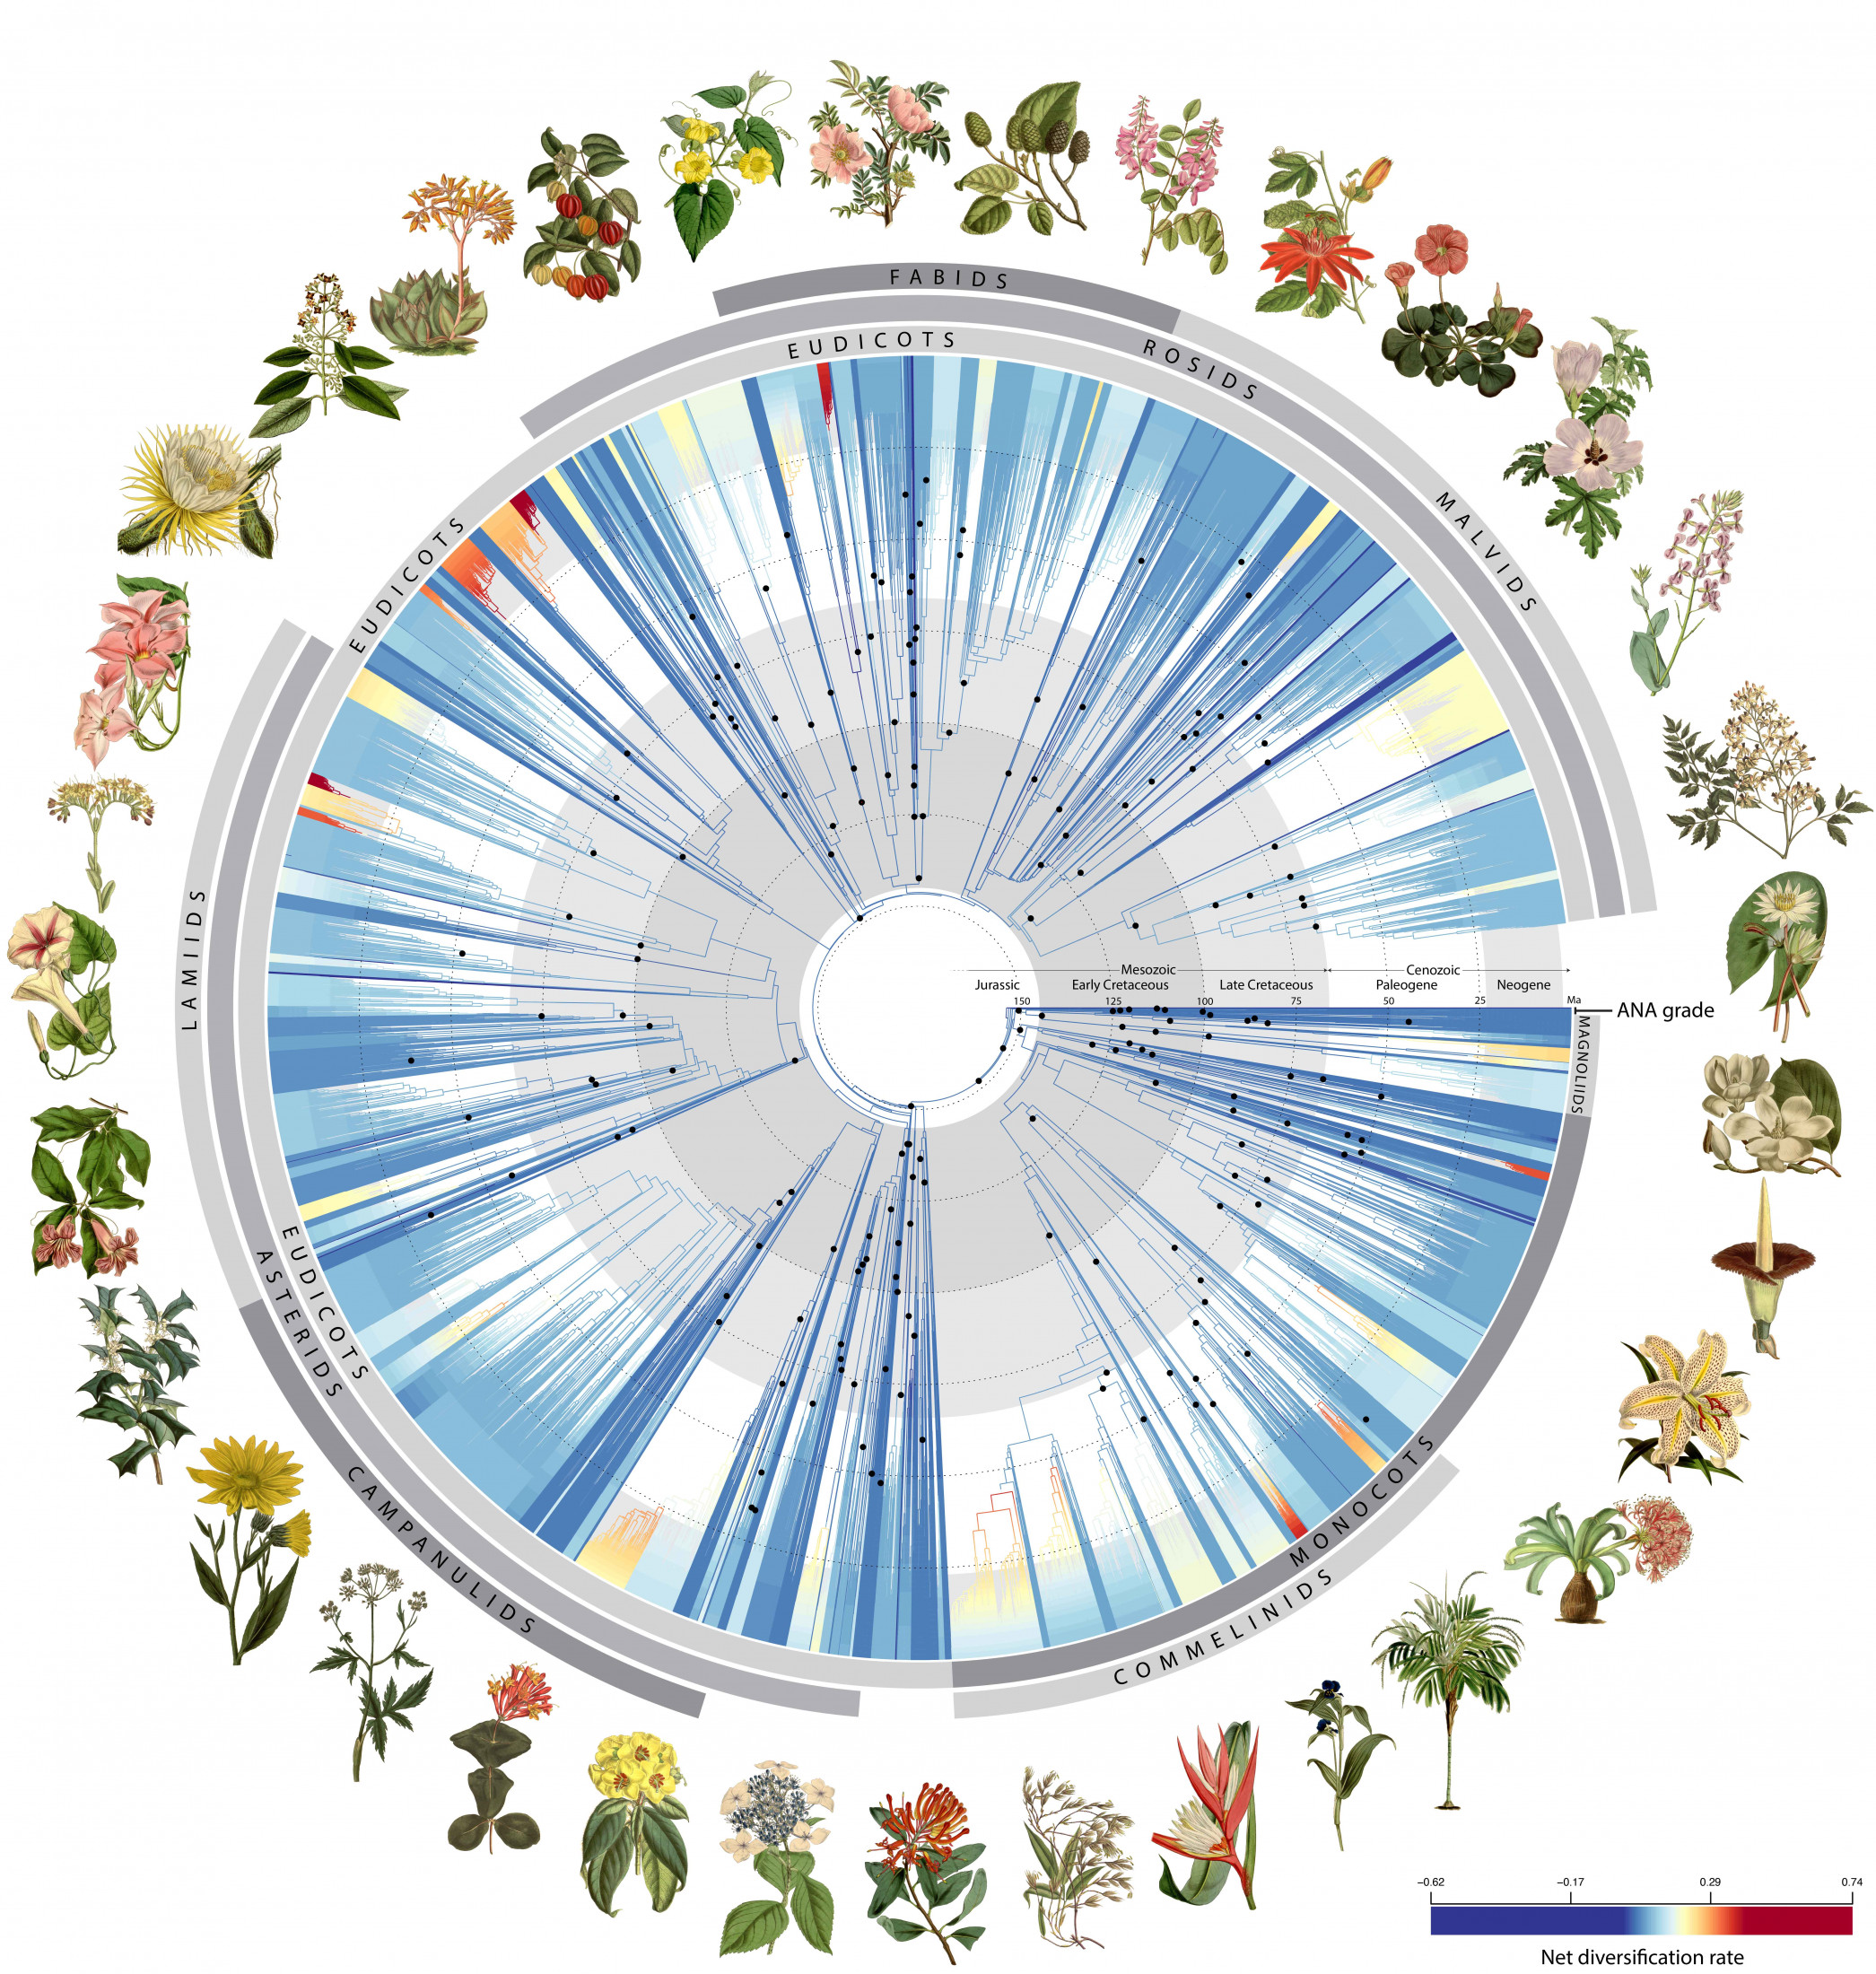 Circular phylogeny of flowering plants with diversification rate shift changes along the branches and illustrations of species around the tips. 